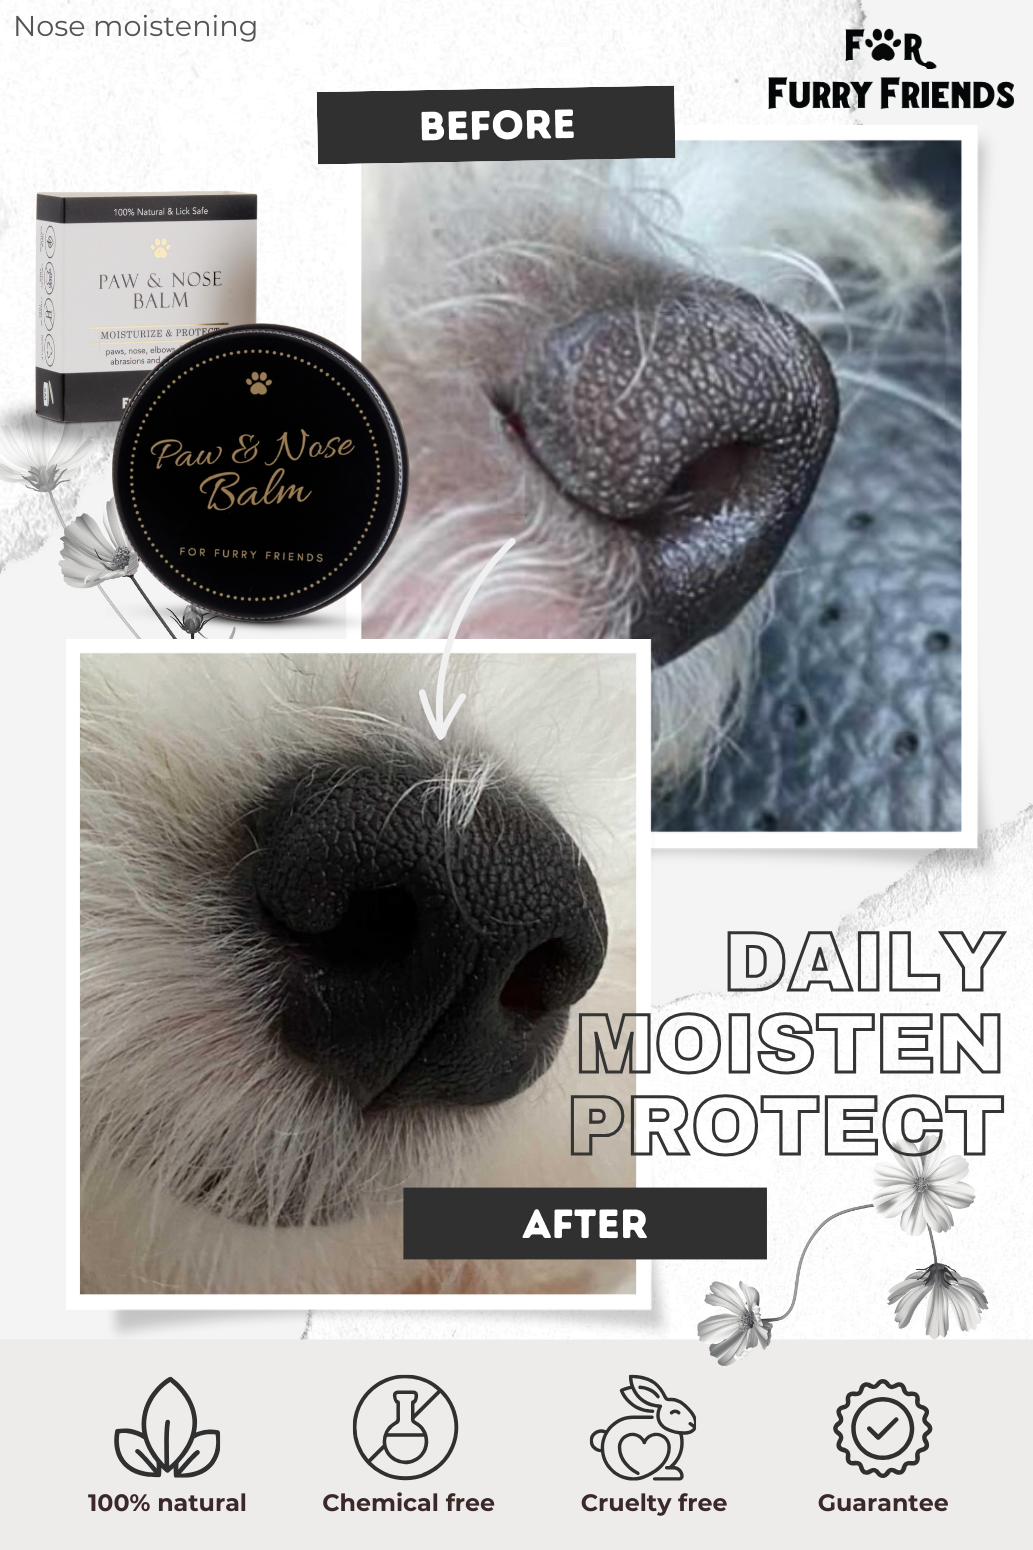 Paw & Nose Balm b4 after 2